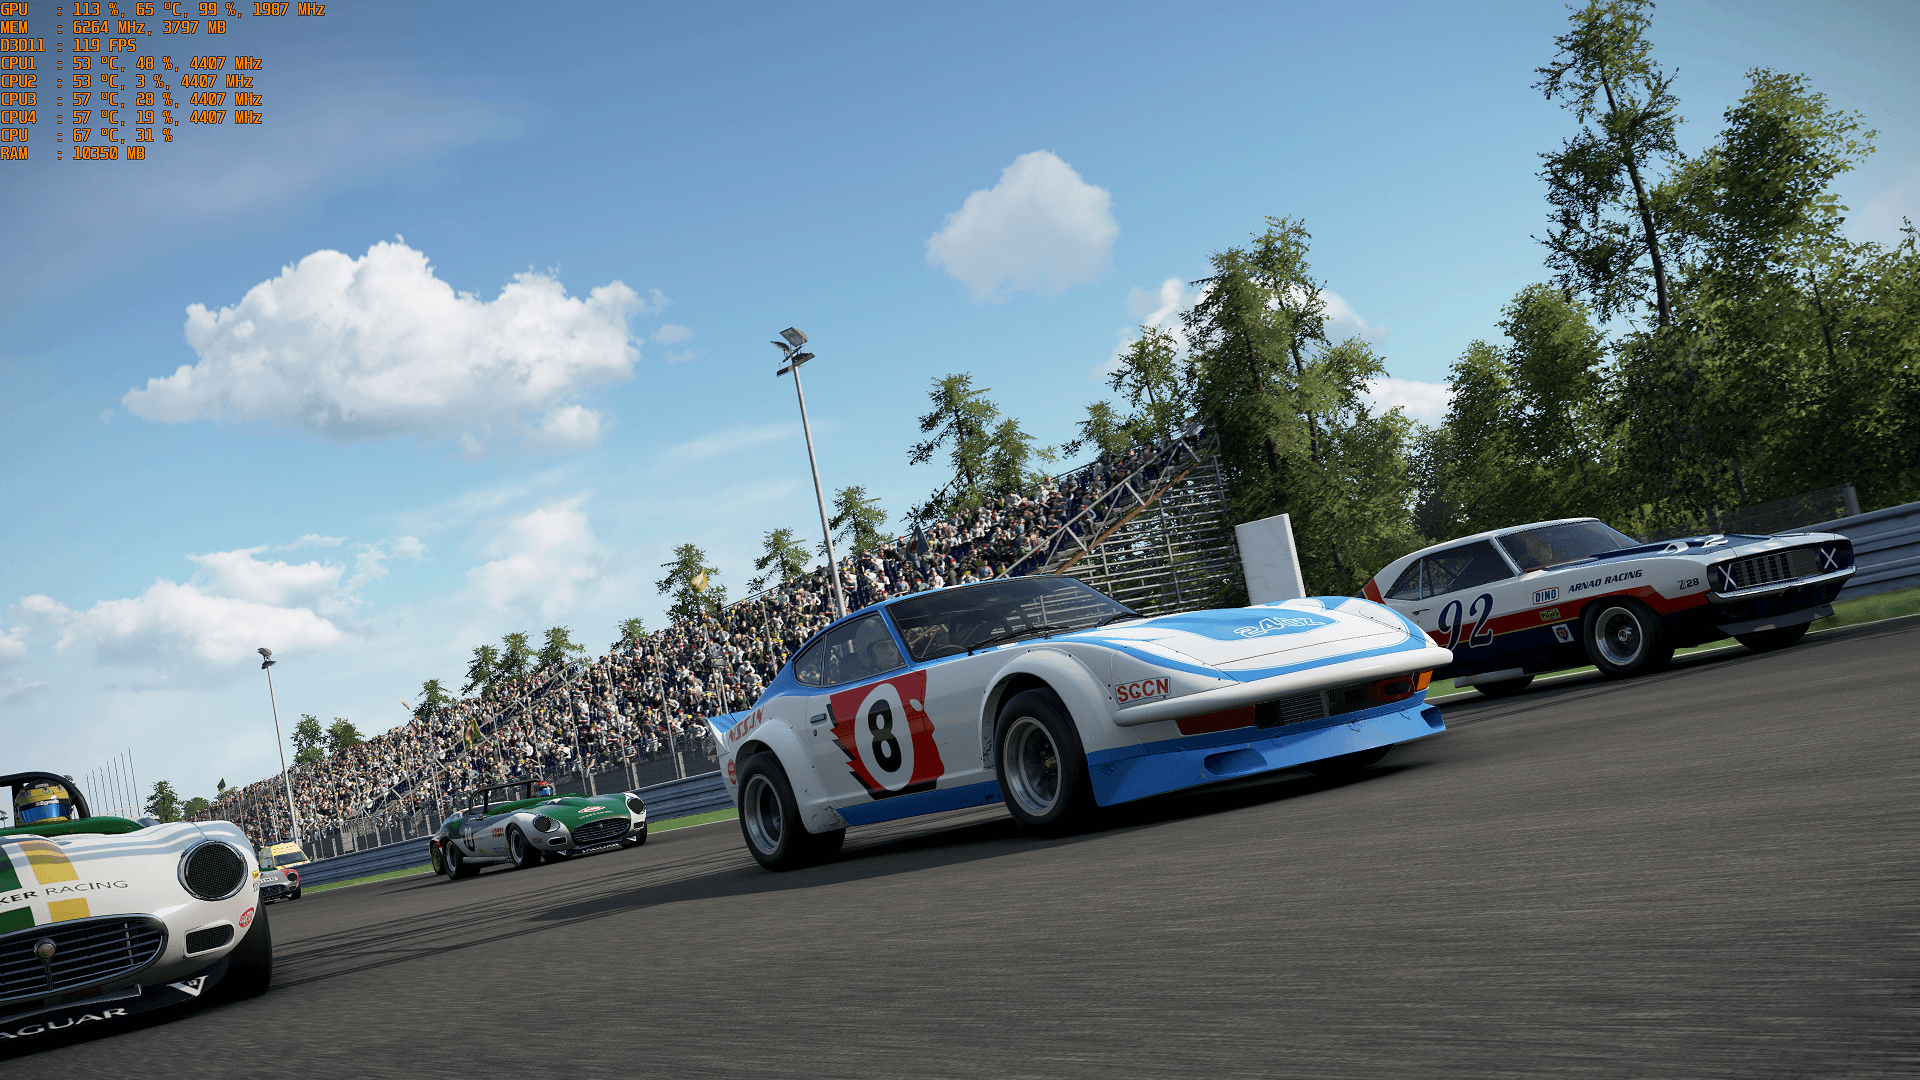 1920x1080 project cars 2 image